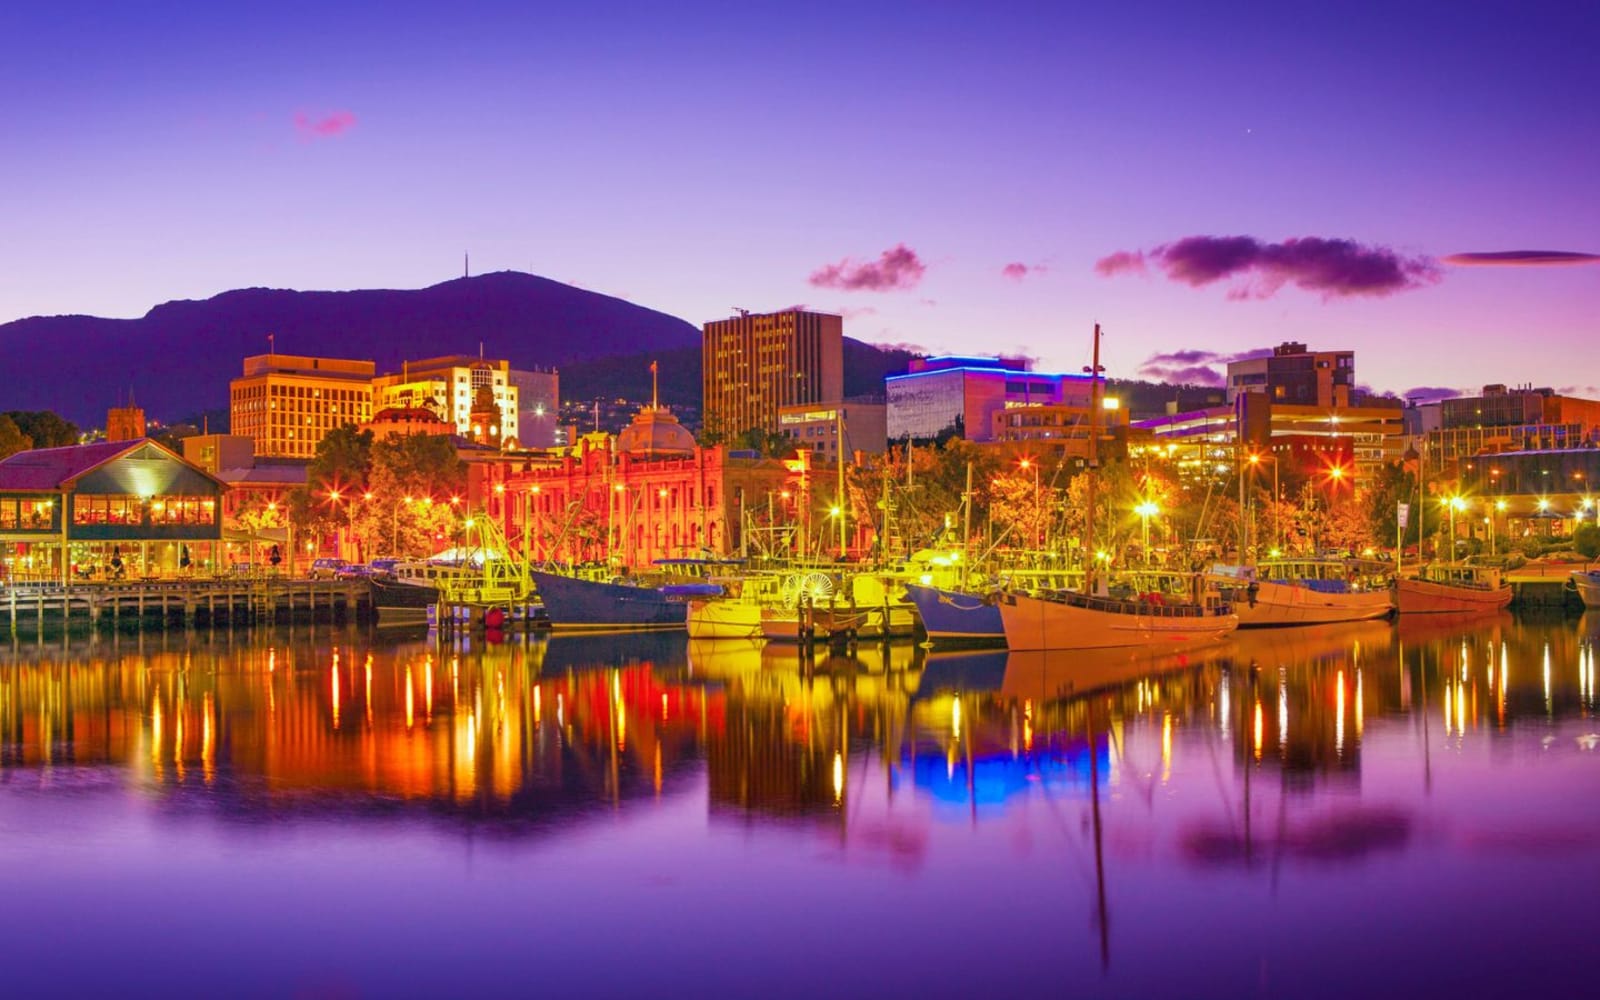 The city of Hobart lit up and reflecting onto the Harbour